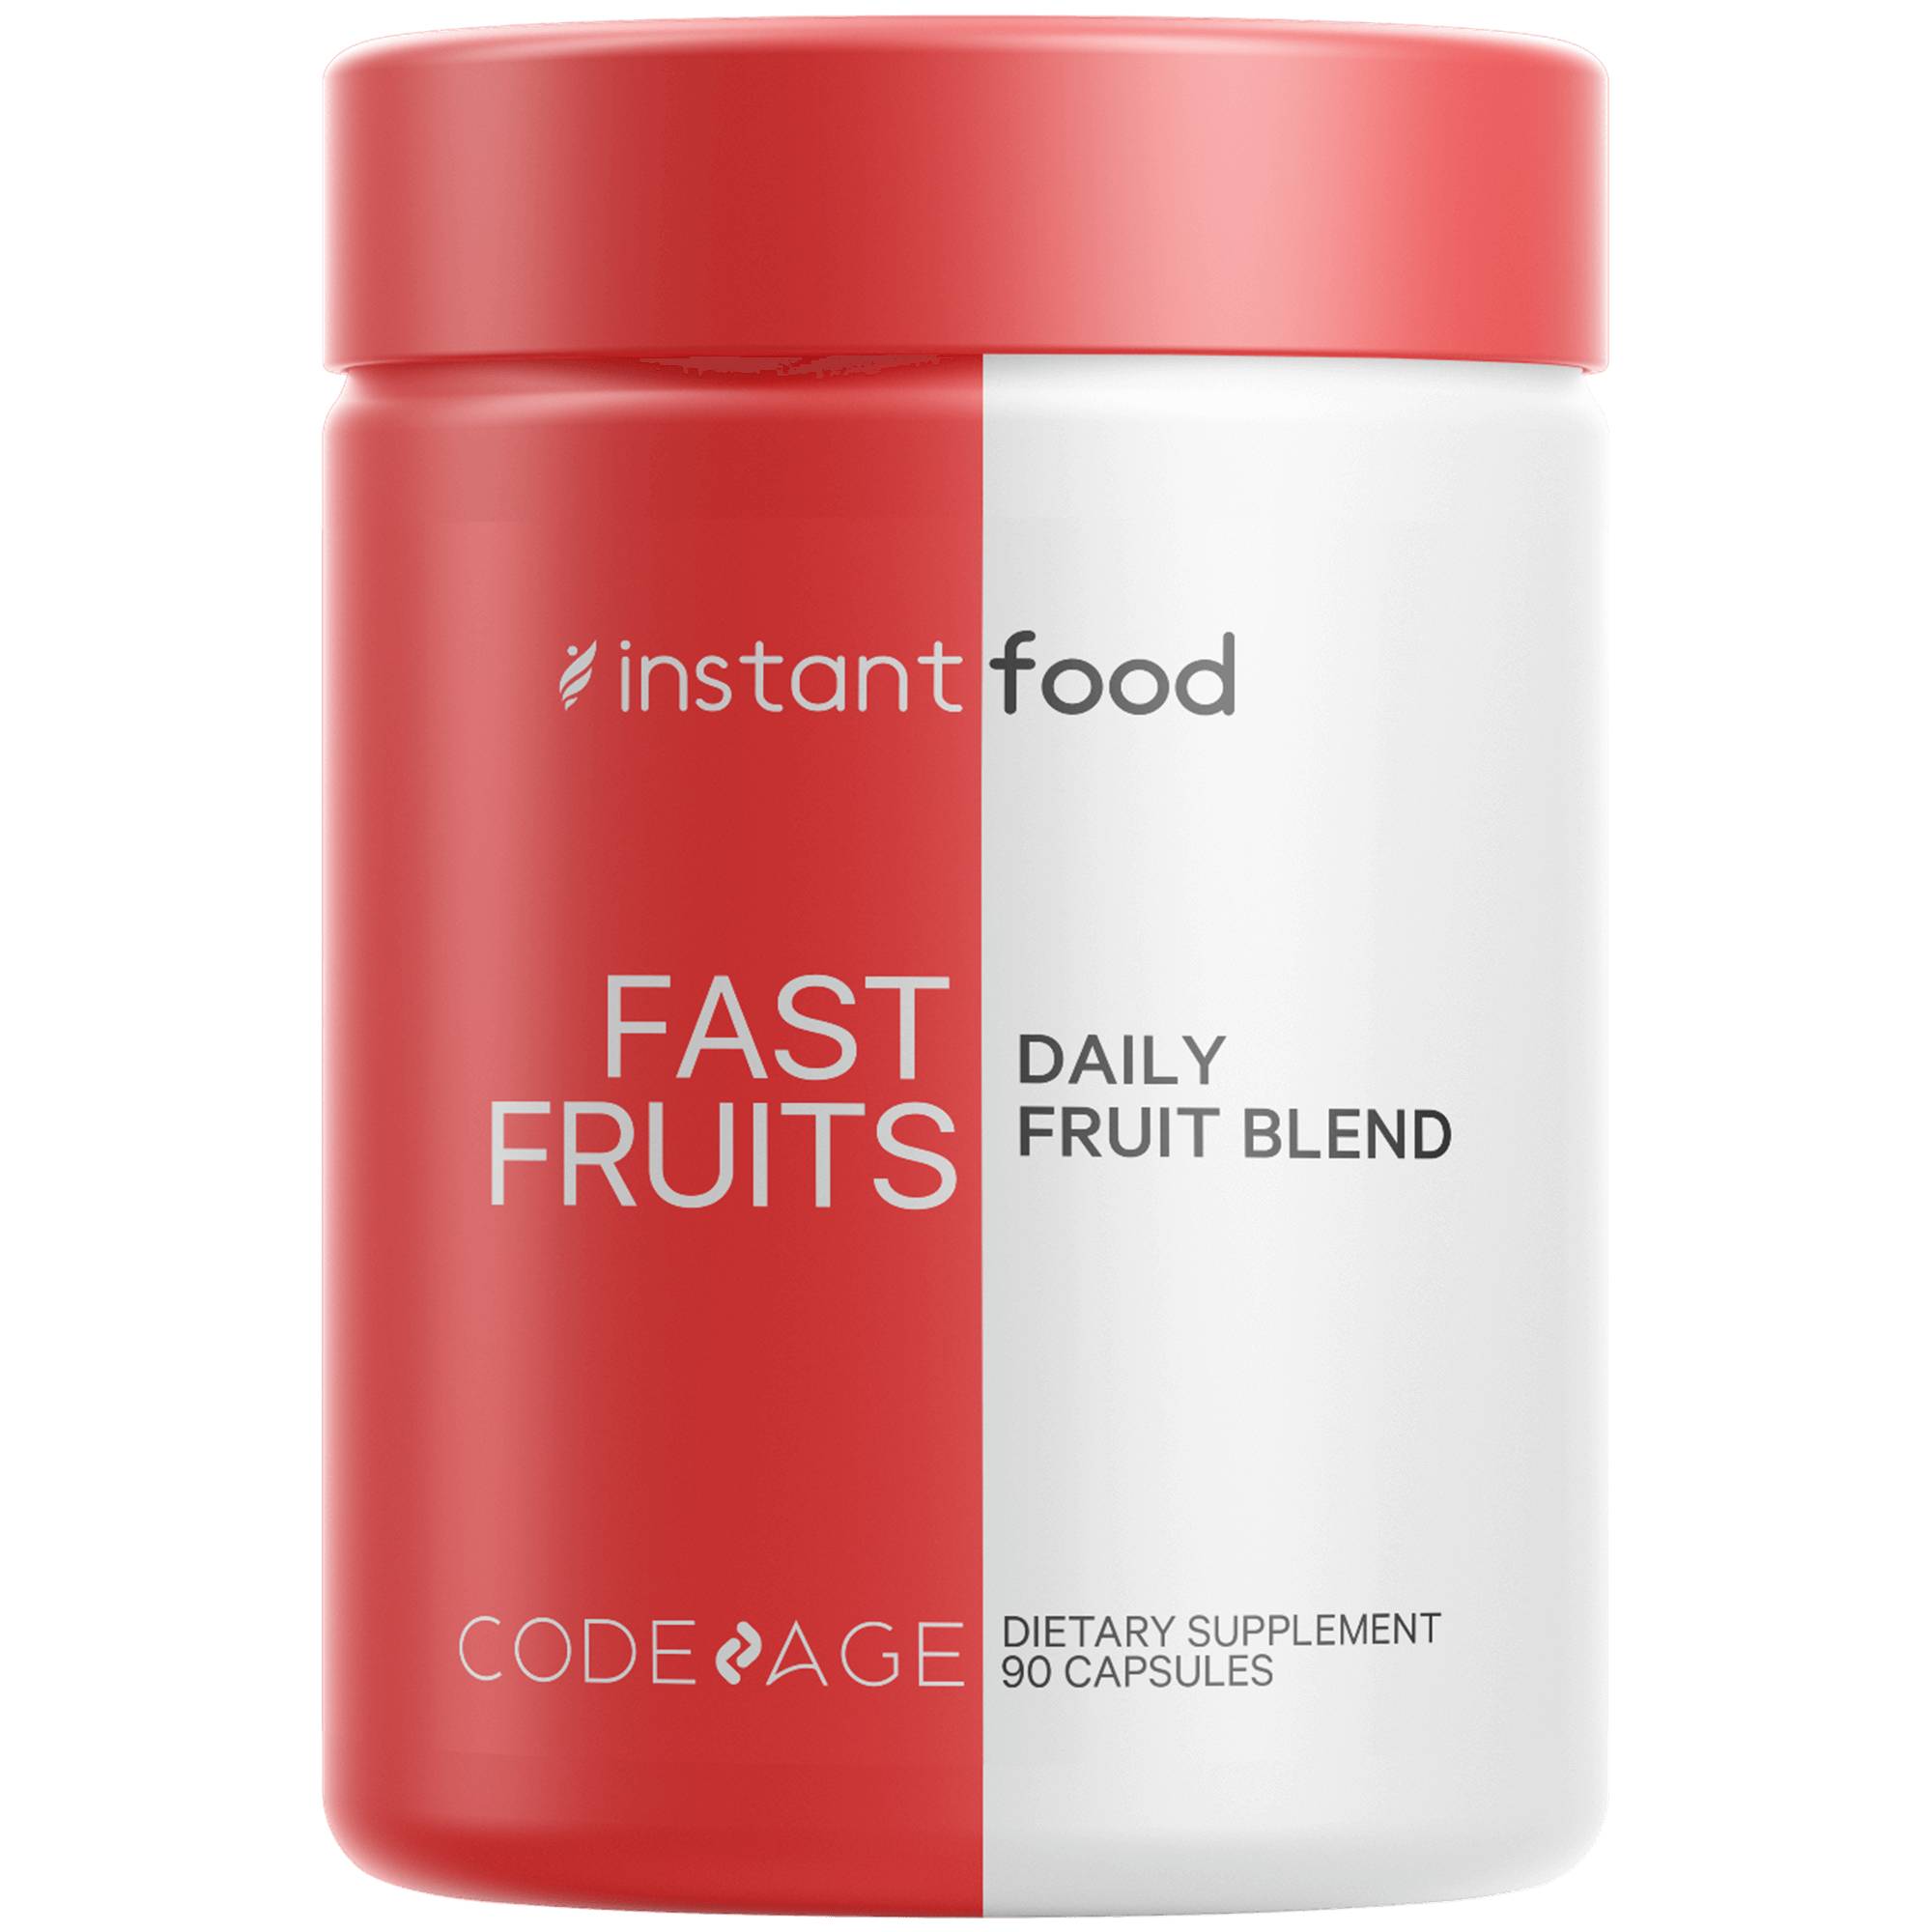 Codeage Instantfood Fast Fruits, Whole Food Daily Fruits Vitamins, Reds Superfood 15 Fruits Extracts, 90 Ct , CVS